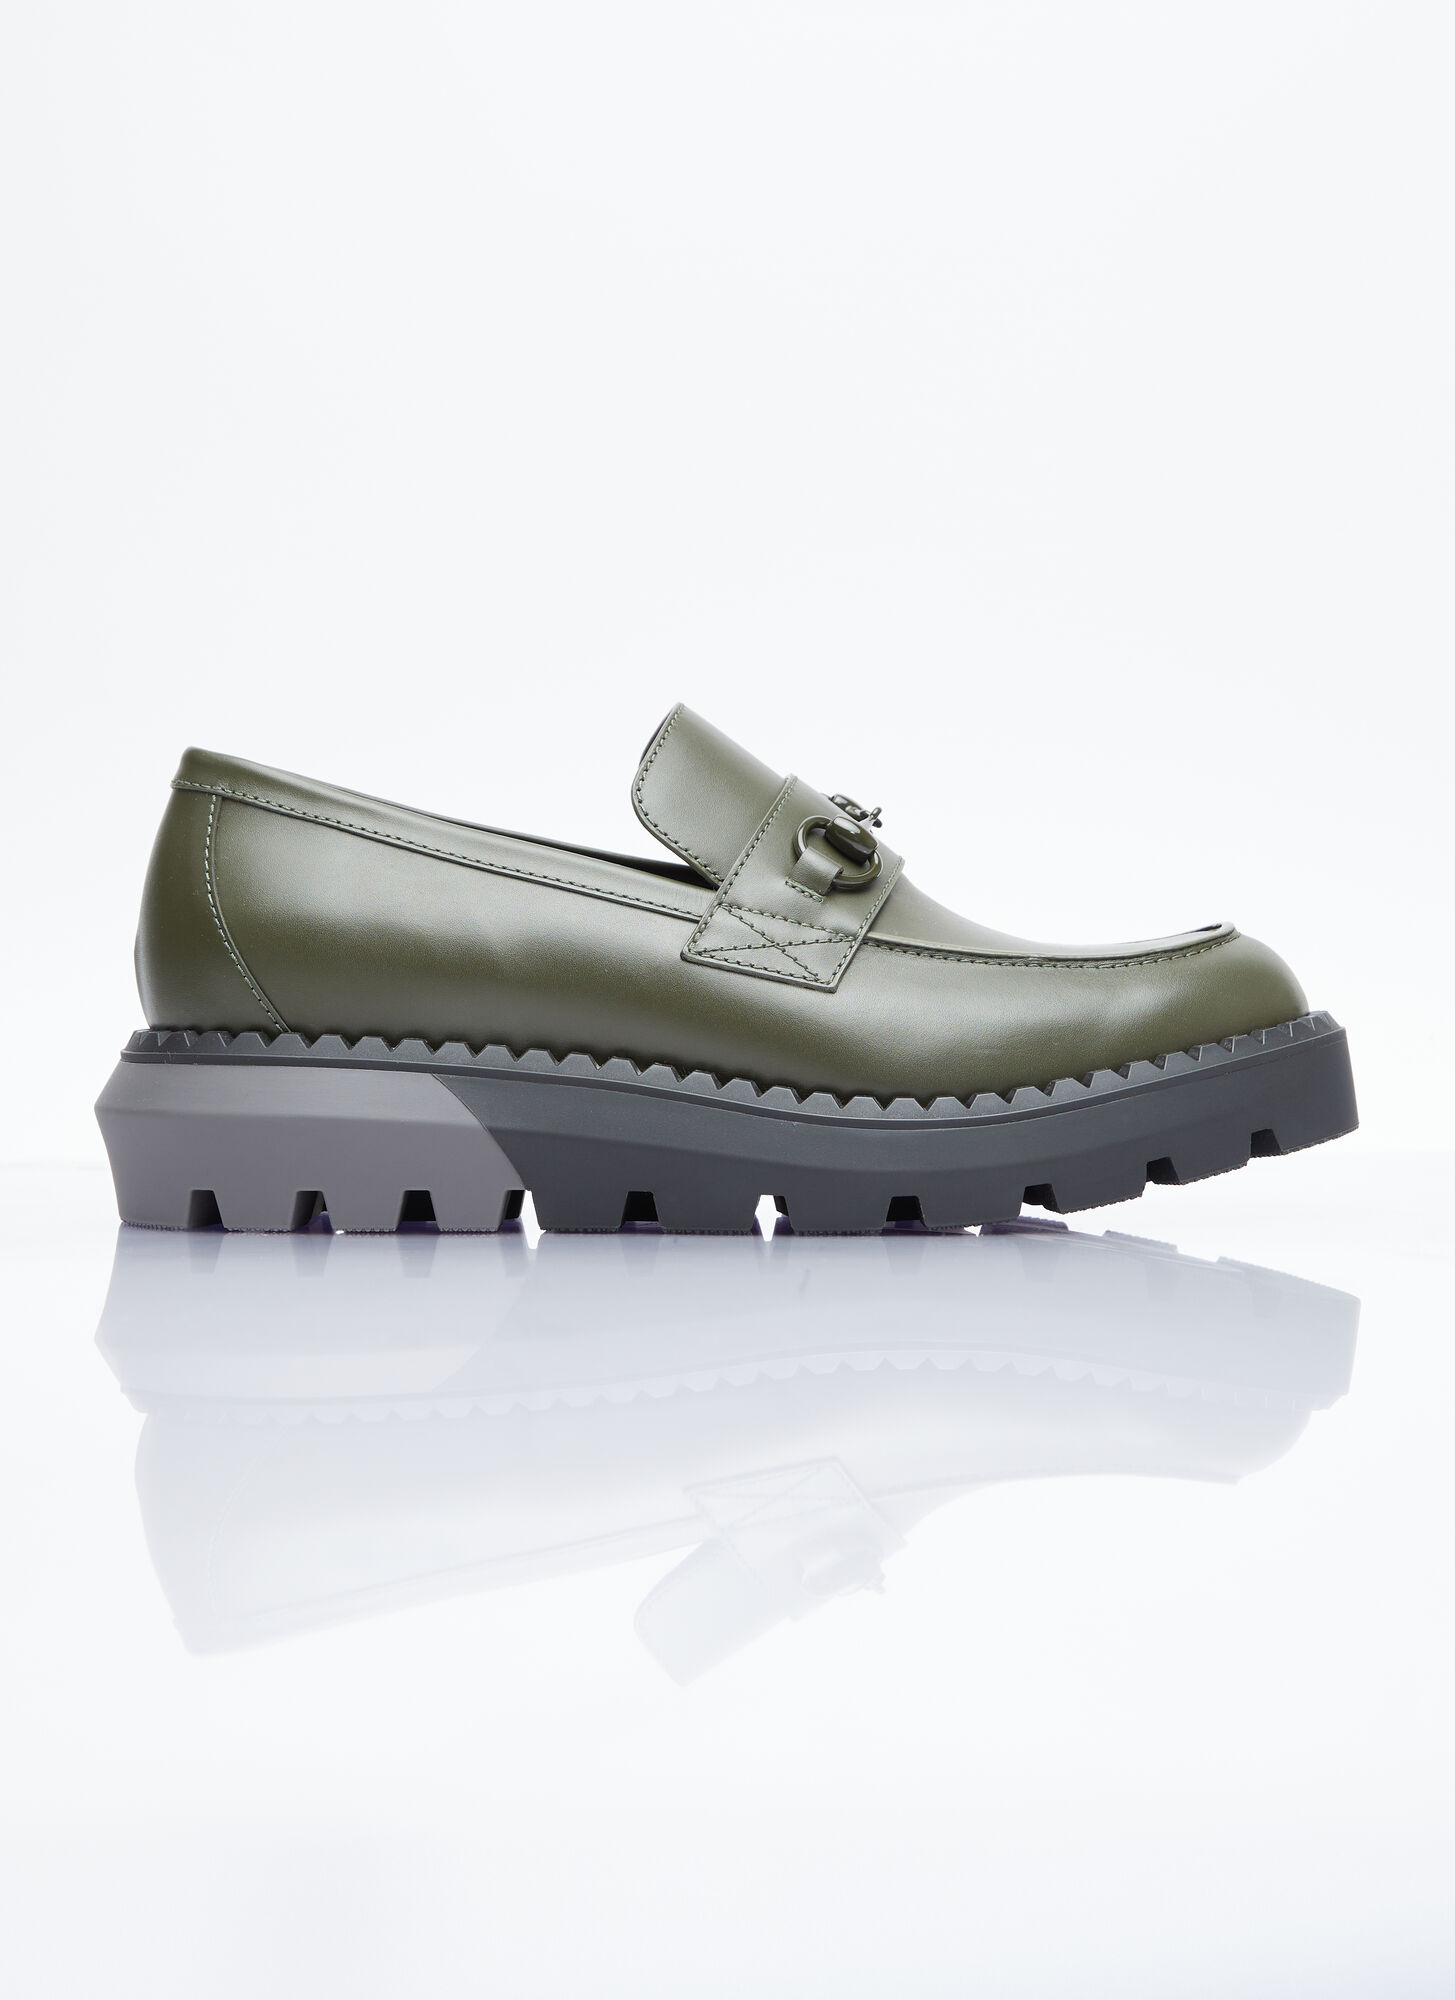 Gucci Horsebit Leather Loafers In Green